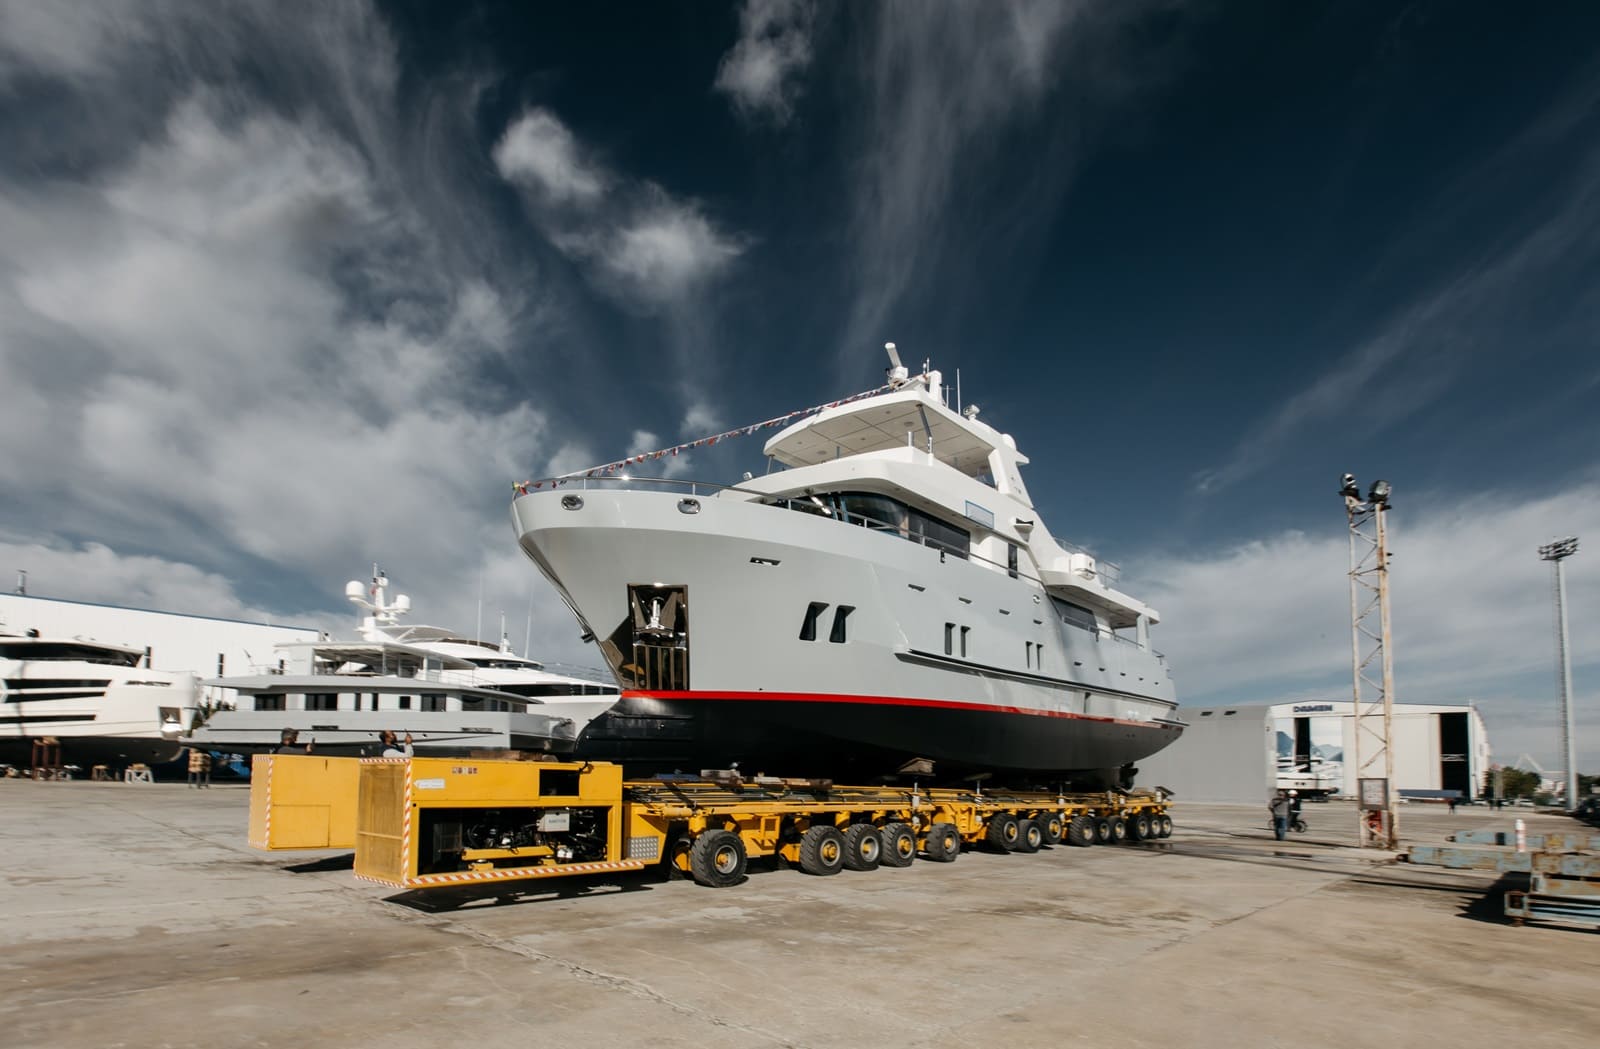 Launched! A new B72 yacht is ready to set sail